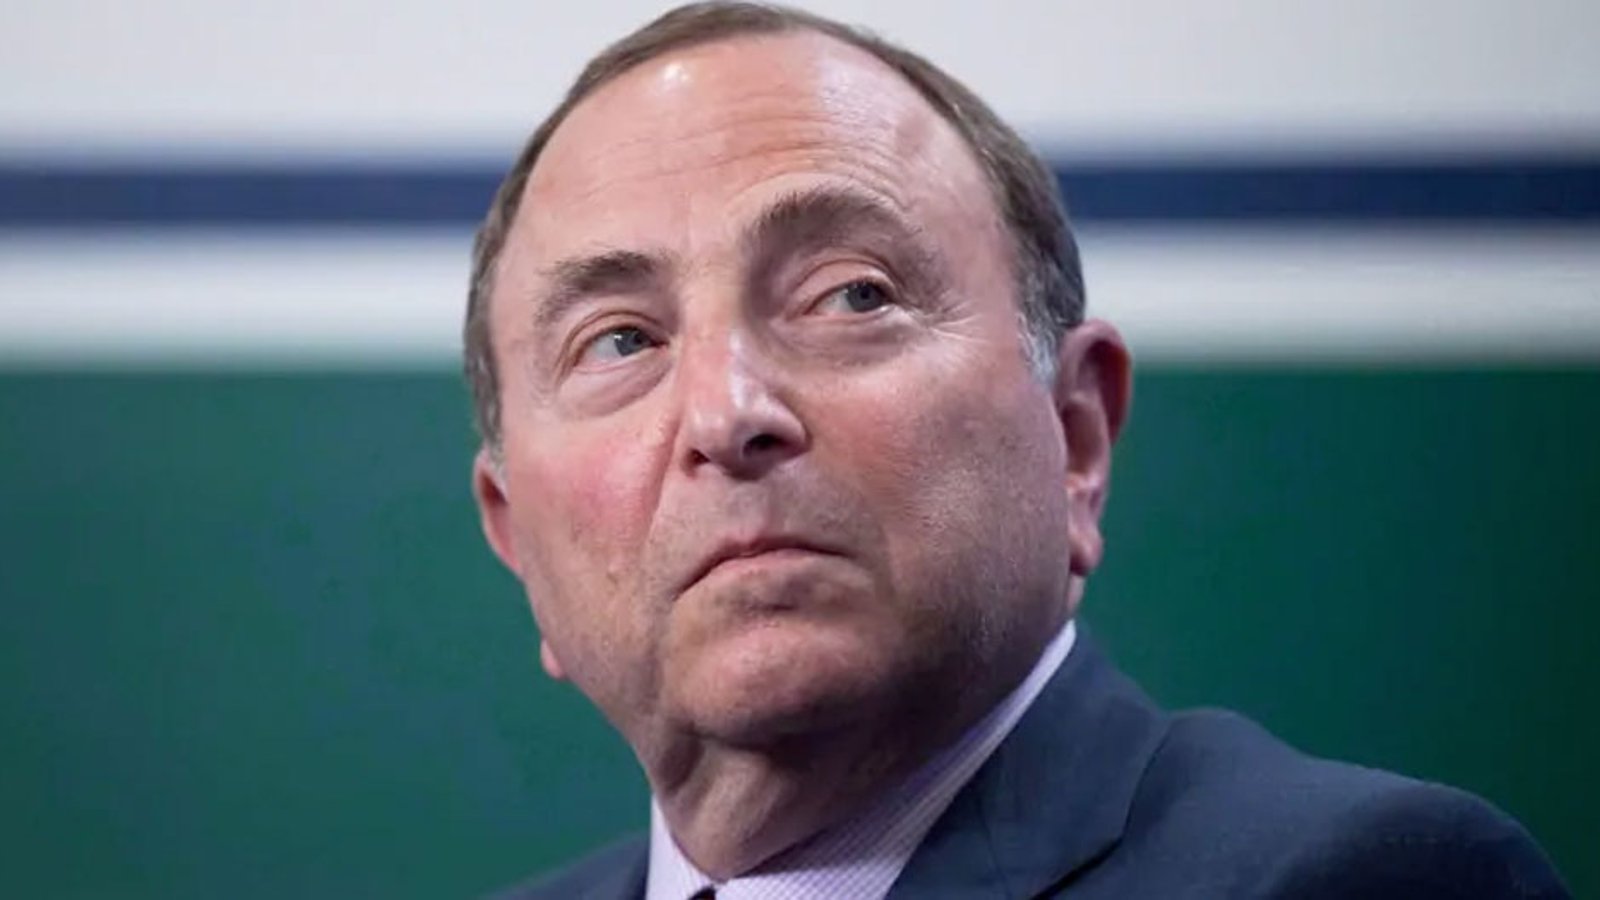 Bettman speaks after CBA negotiations with NHLPA